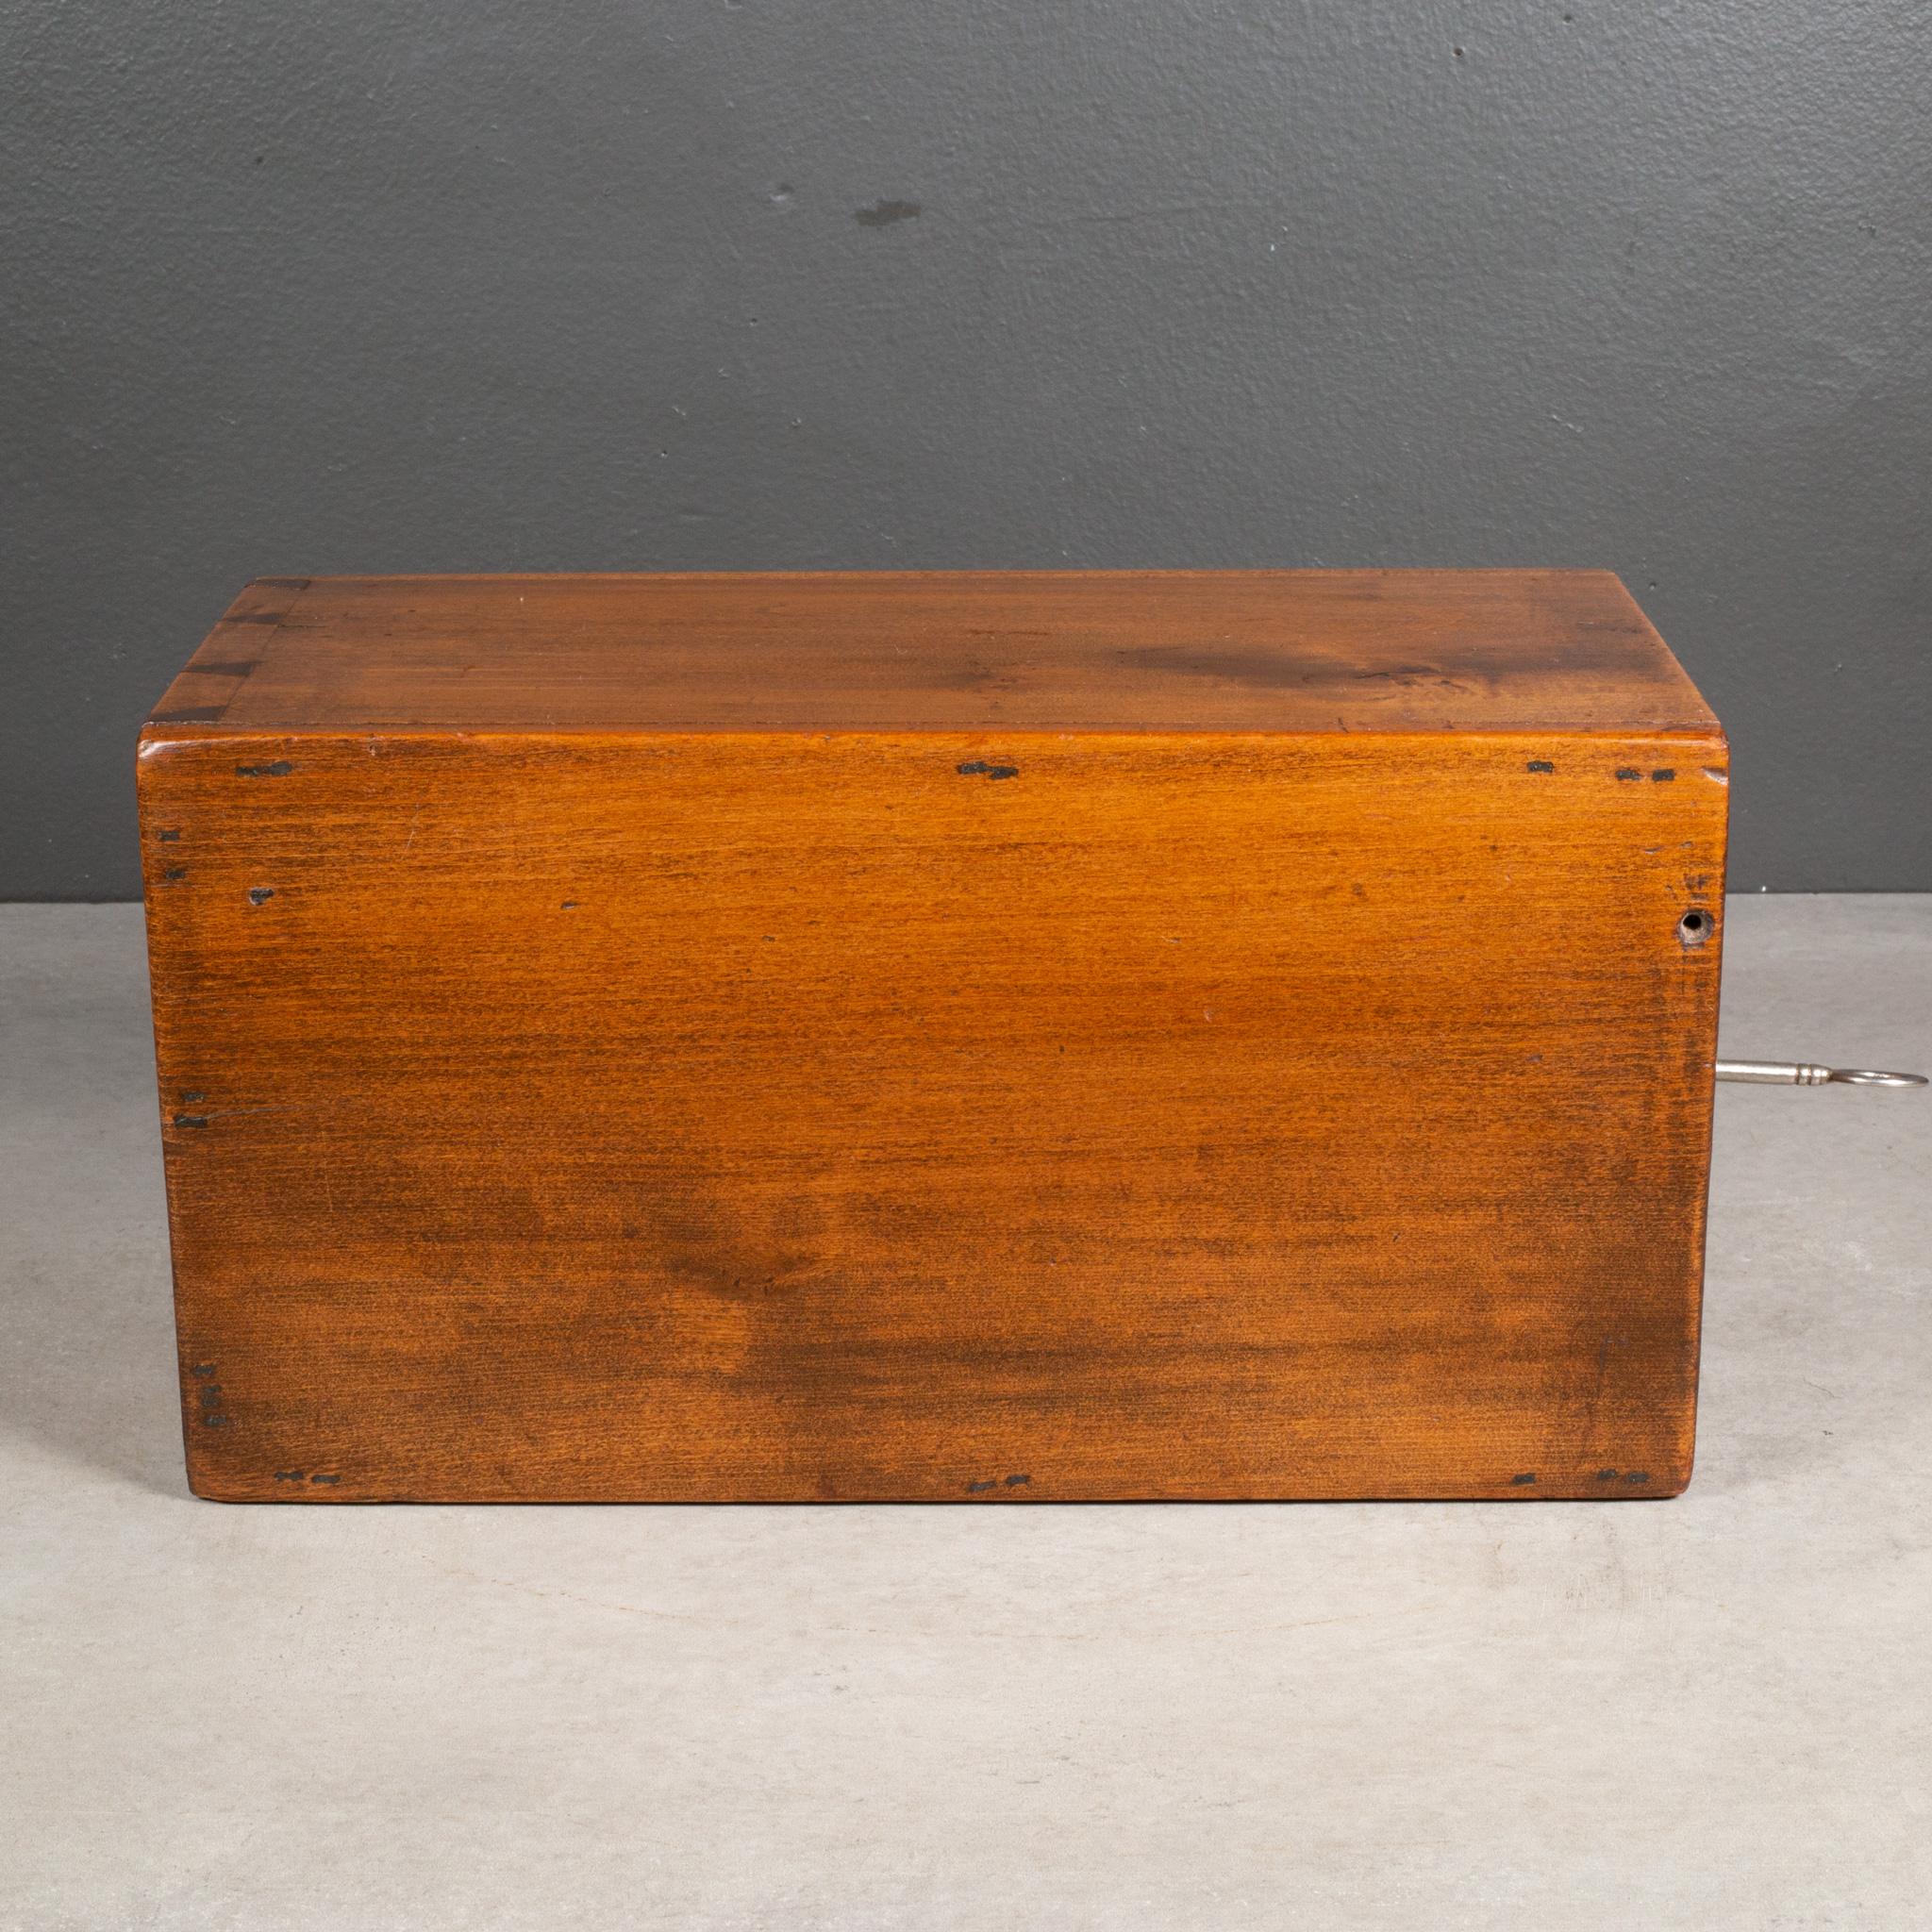 Signed Mid-19th c. Wooden Lock Box c.1863 For Sale 2